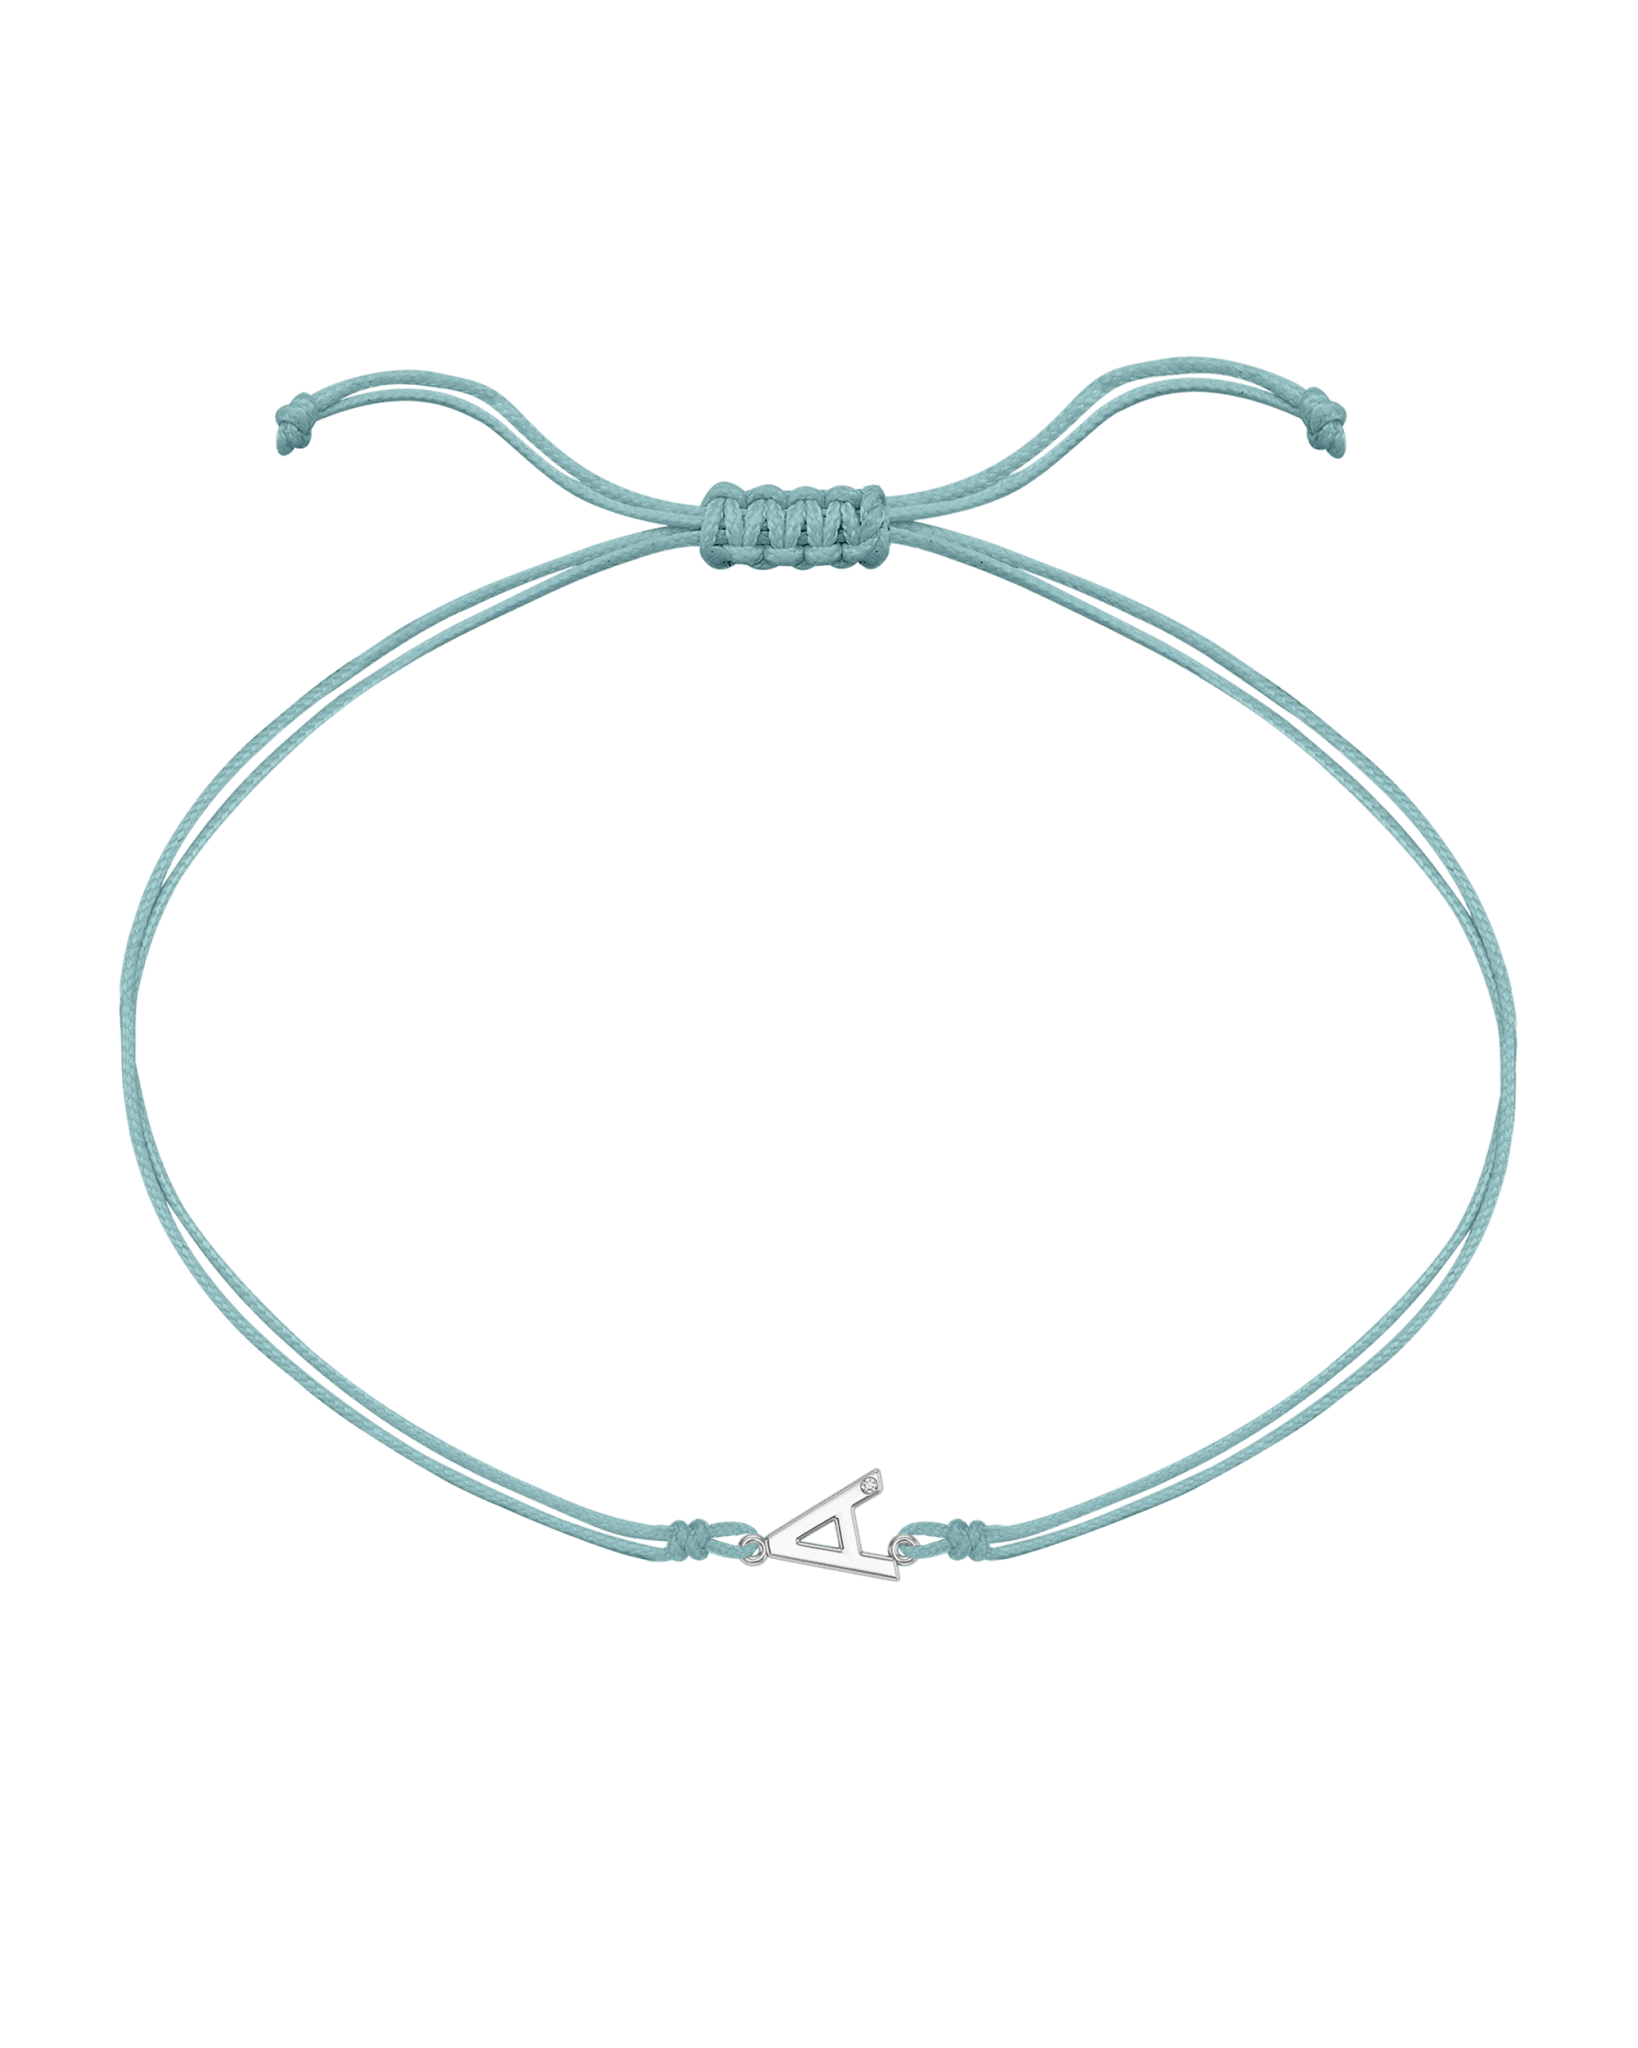 Initial String of Love - 14K White Gold Bracelets 14K Solid Gold Turquoise 